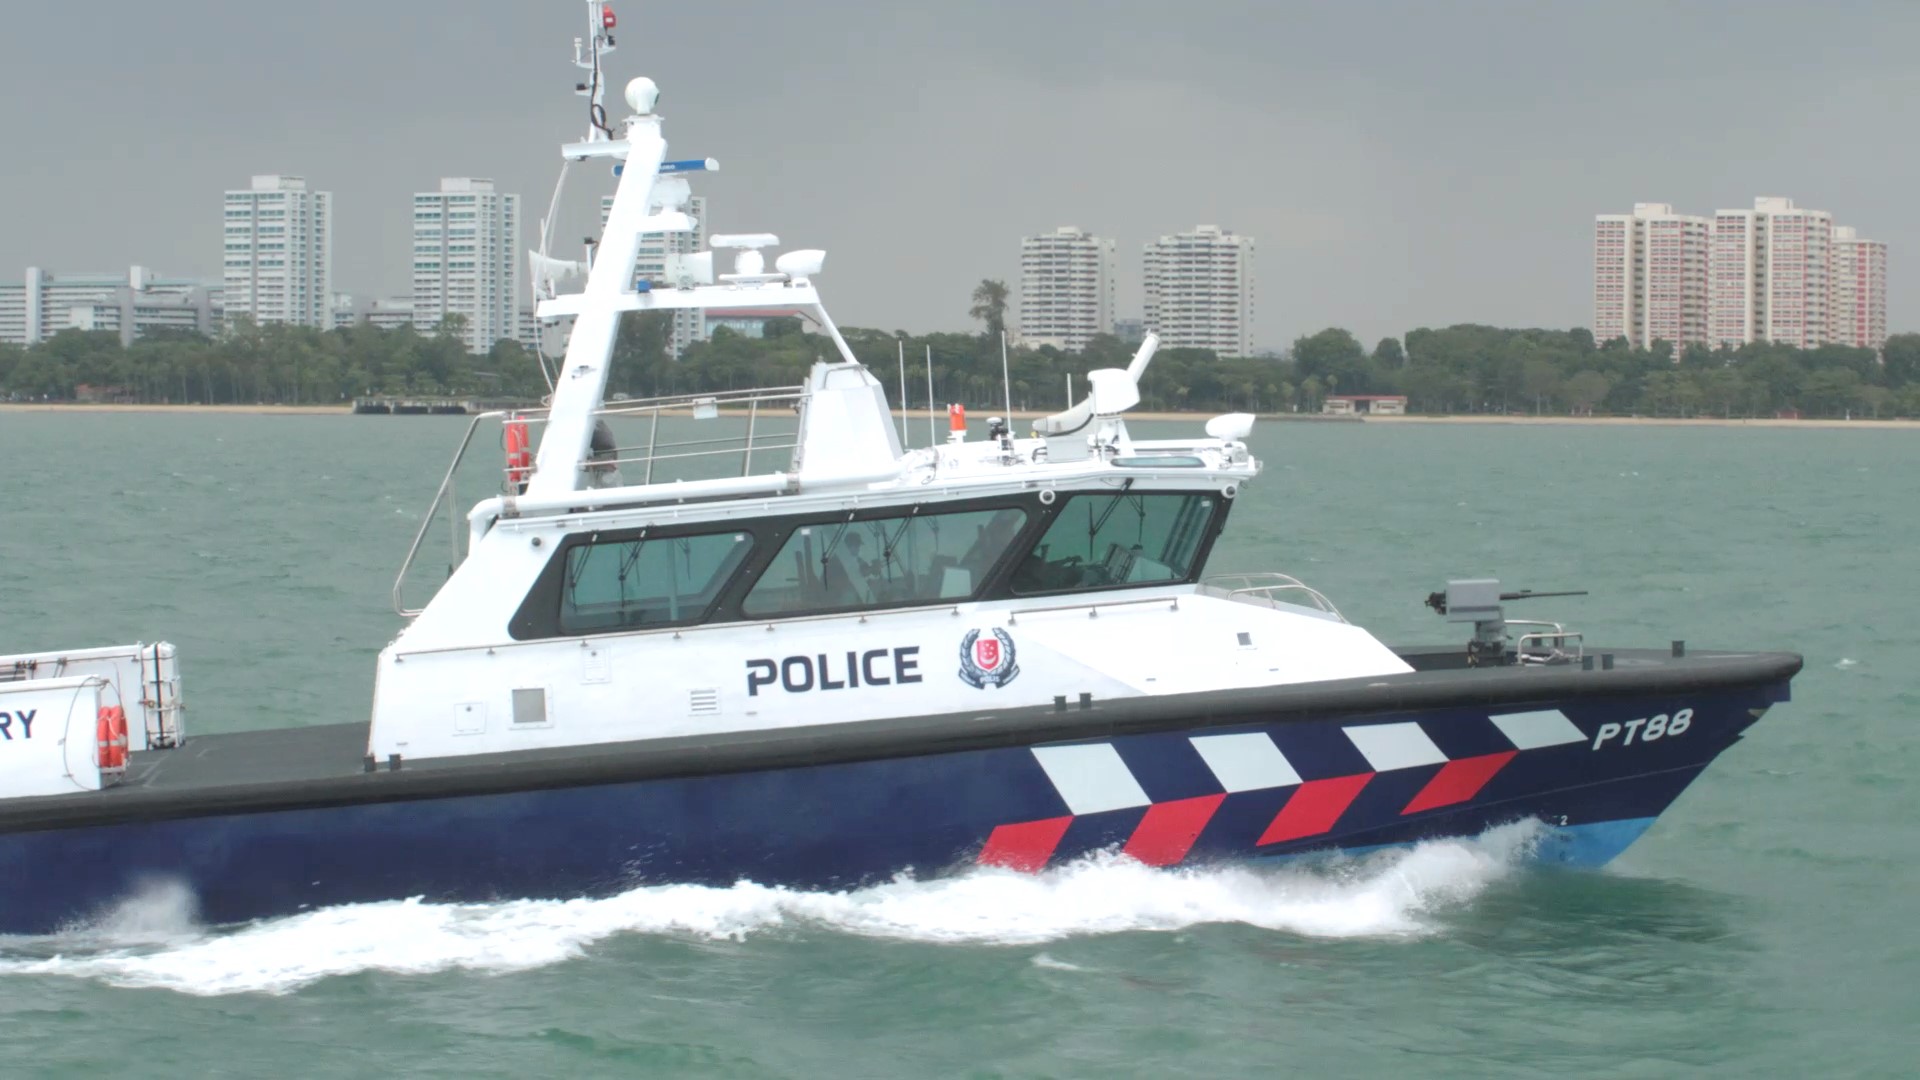 Police Coast Guard Commissioning Ceremony For Next-Generation Patrol Craft